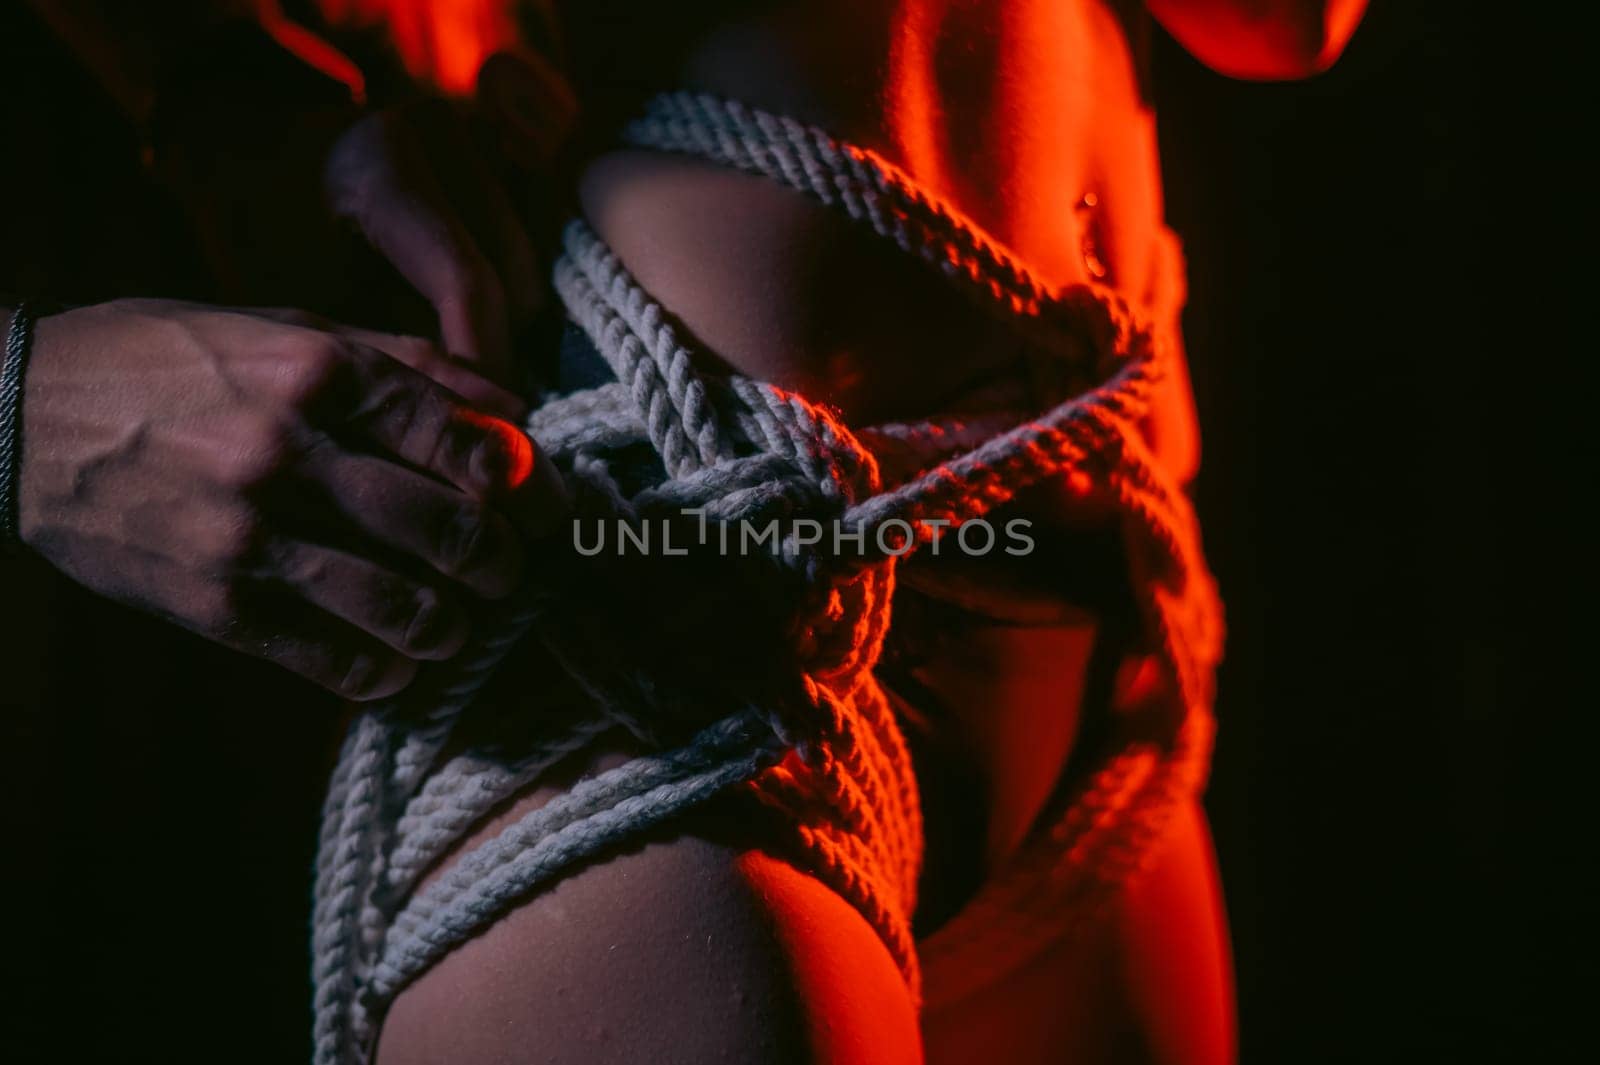 Man tightens ropes using Japanese shibari technique on woman's body in red light